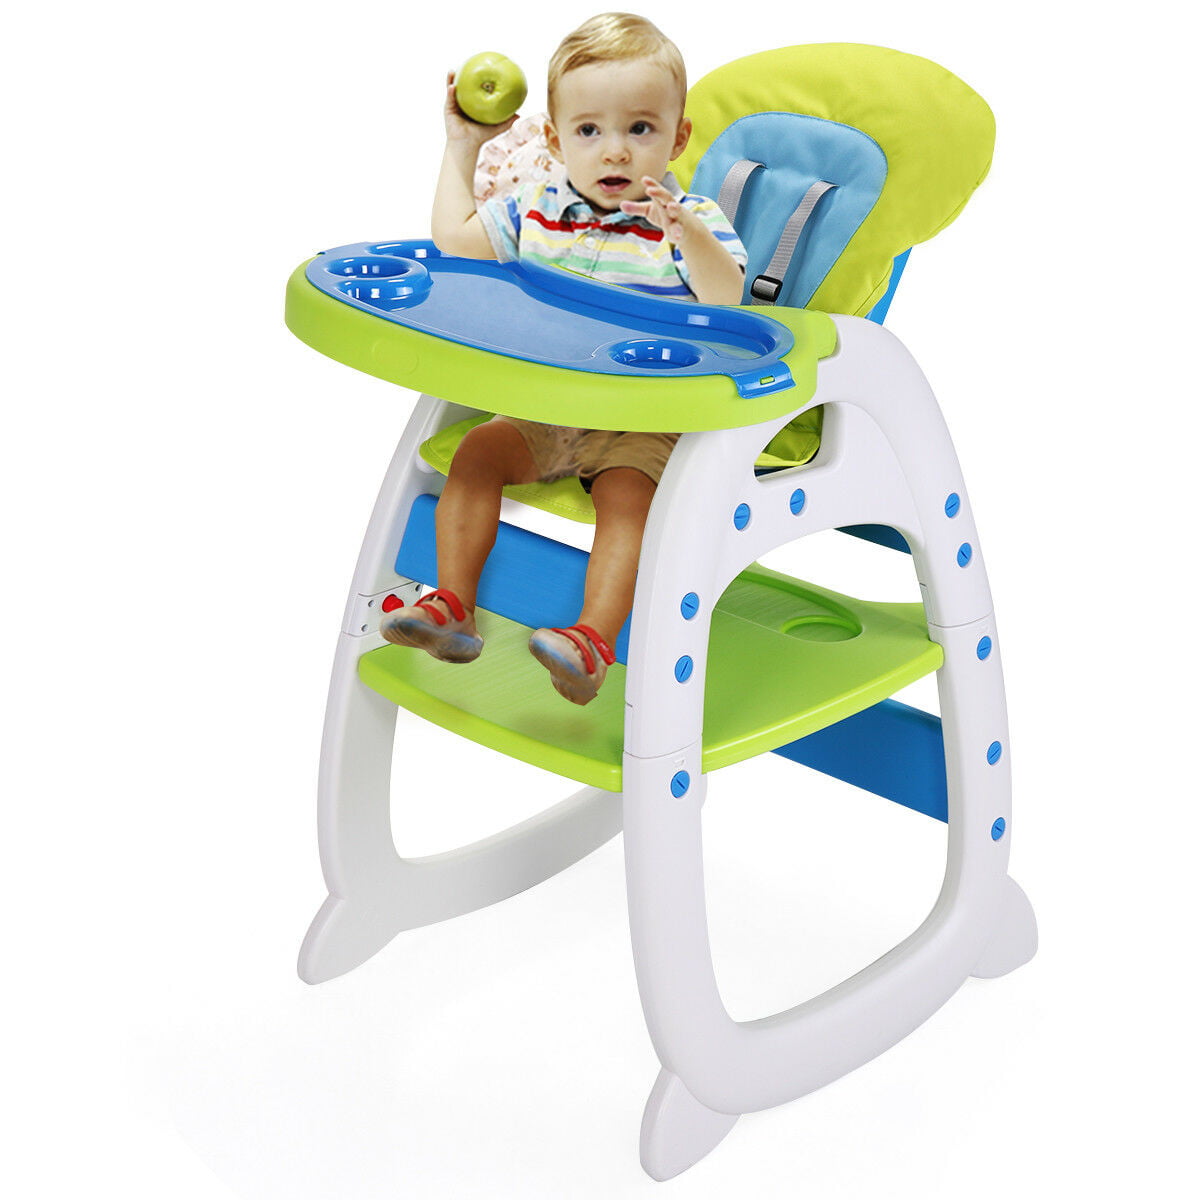 3 in1 Baby Highchair Toddler Infant Kids Feeding Tray Adjustable High Chair Blue